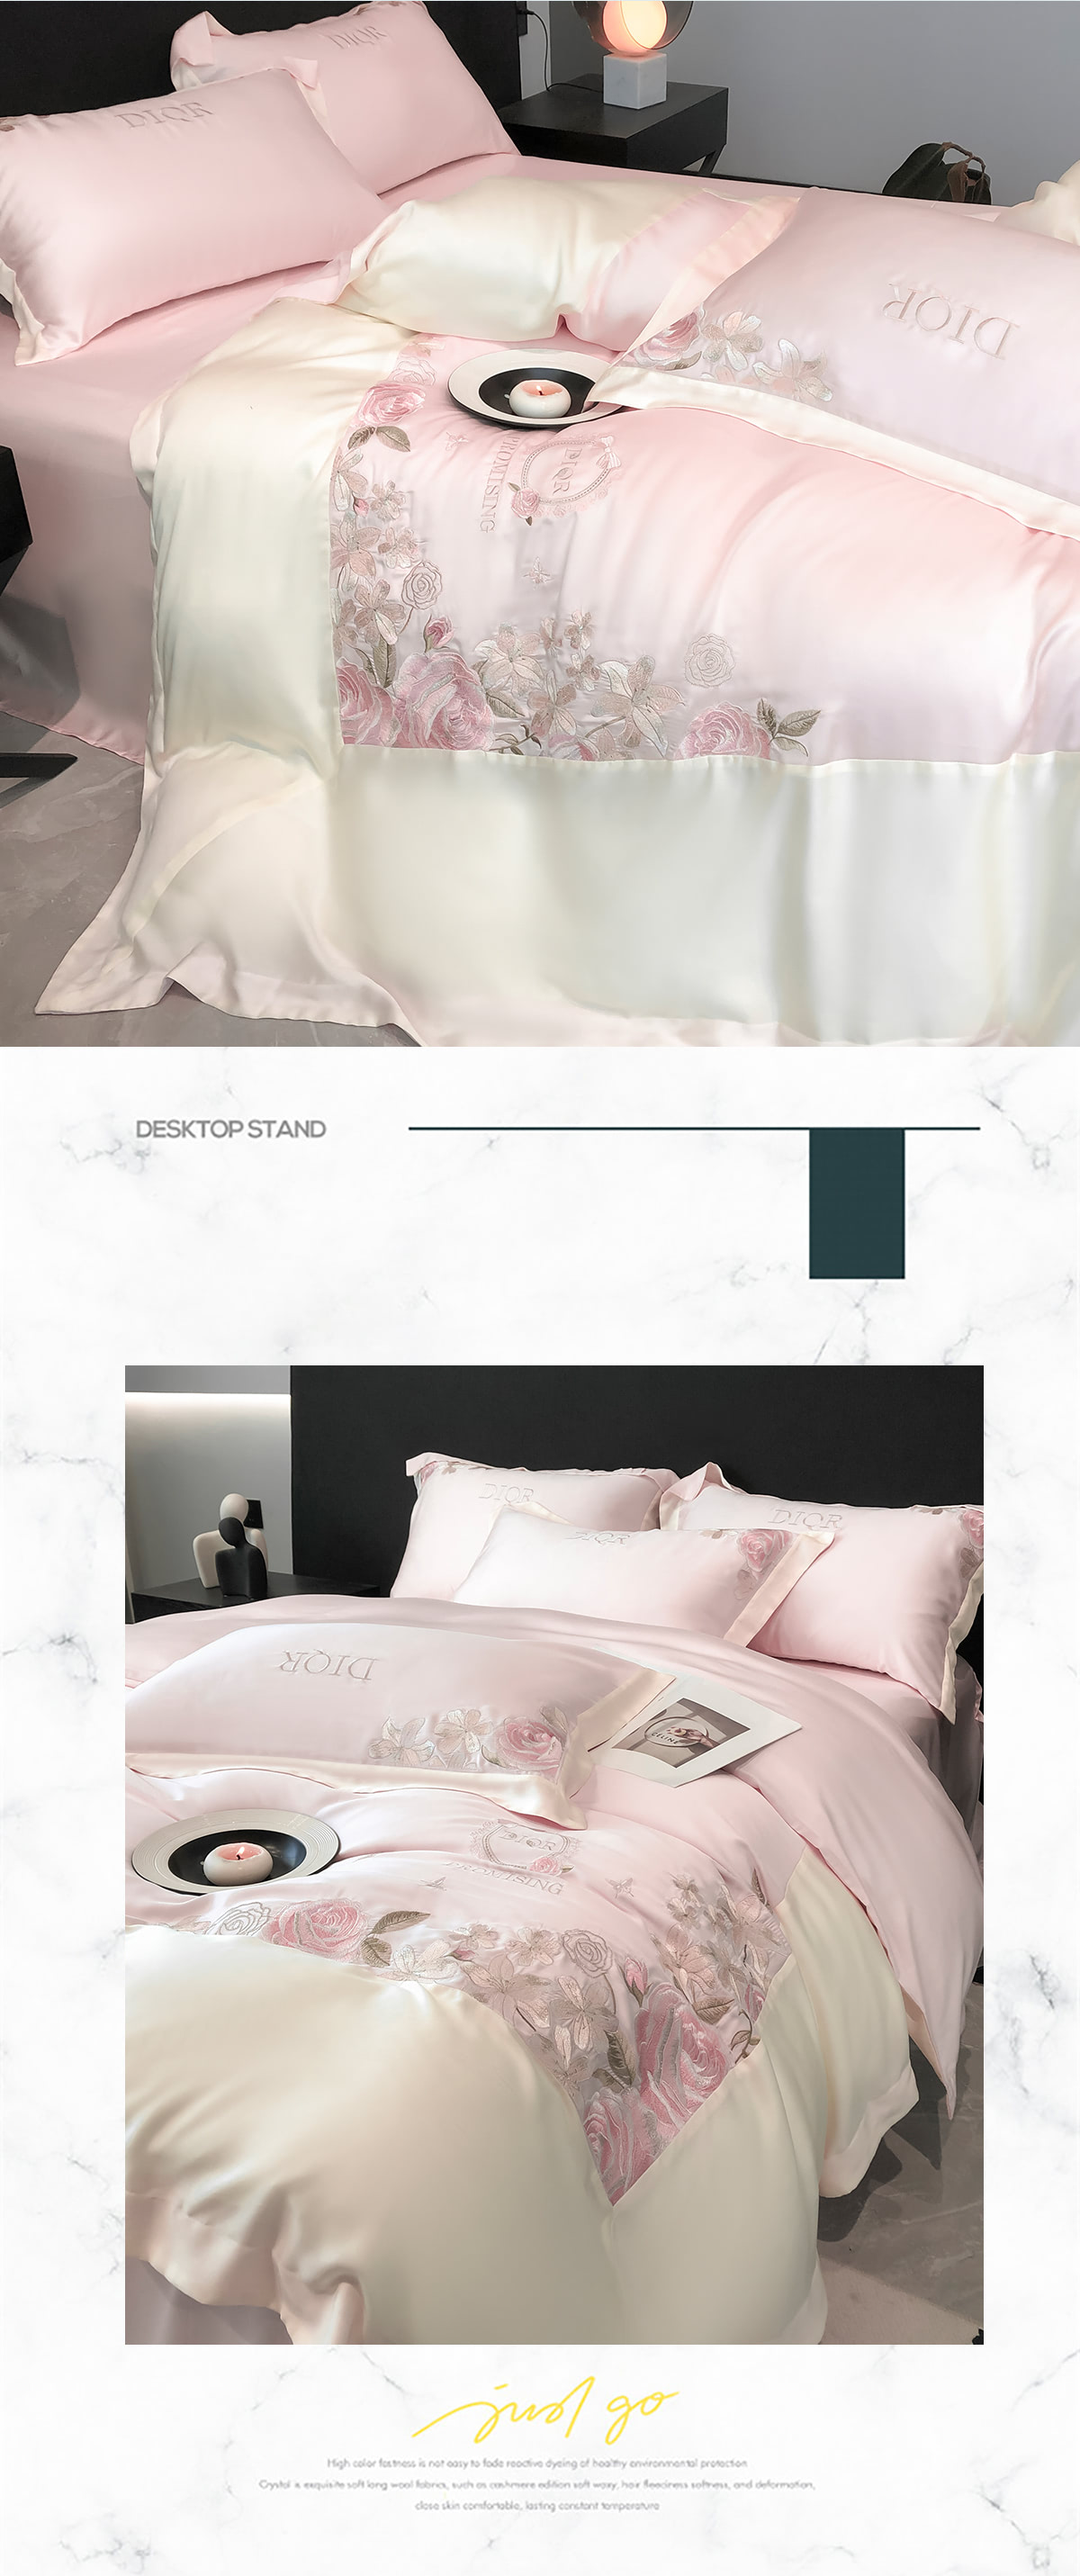 Aesthetic-Embroidery-Home-Textiles-Duvet-Cover-Bedding-Set24